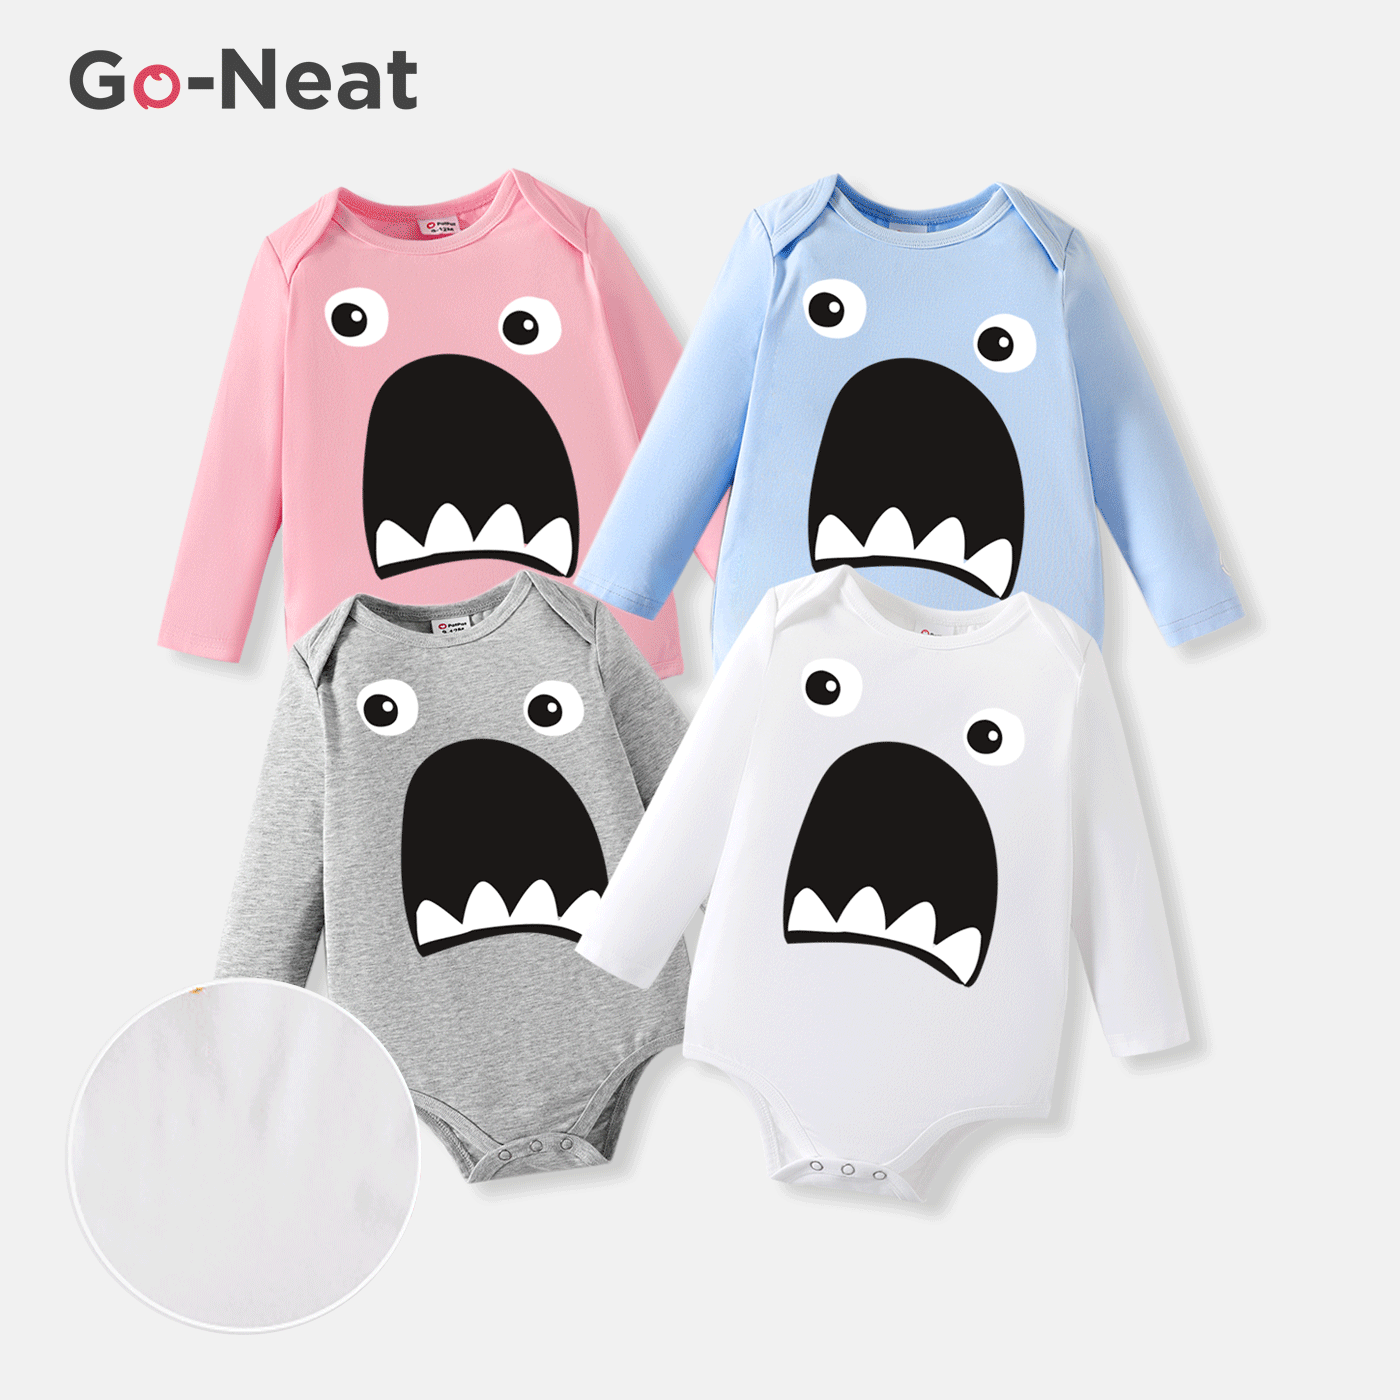 [0-24M]Go-Neat Water Repellent and Stain Resistant Baby Boy/Girl Shark Print Long-sleeve Romper